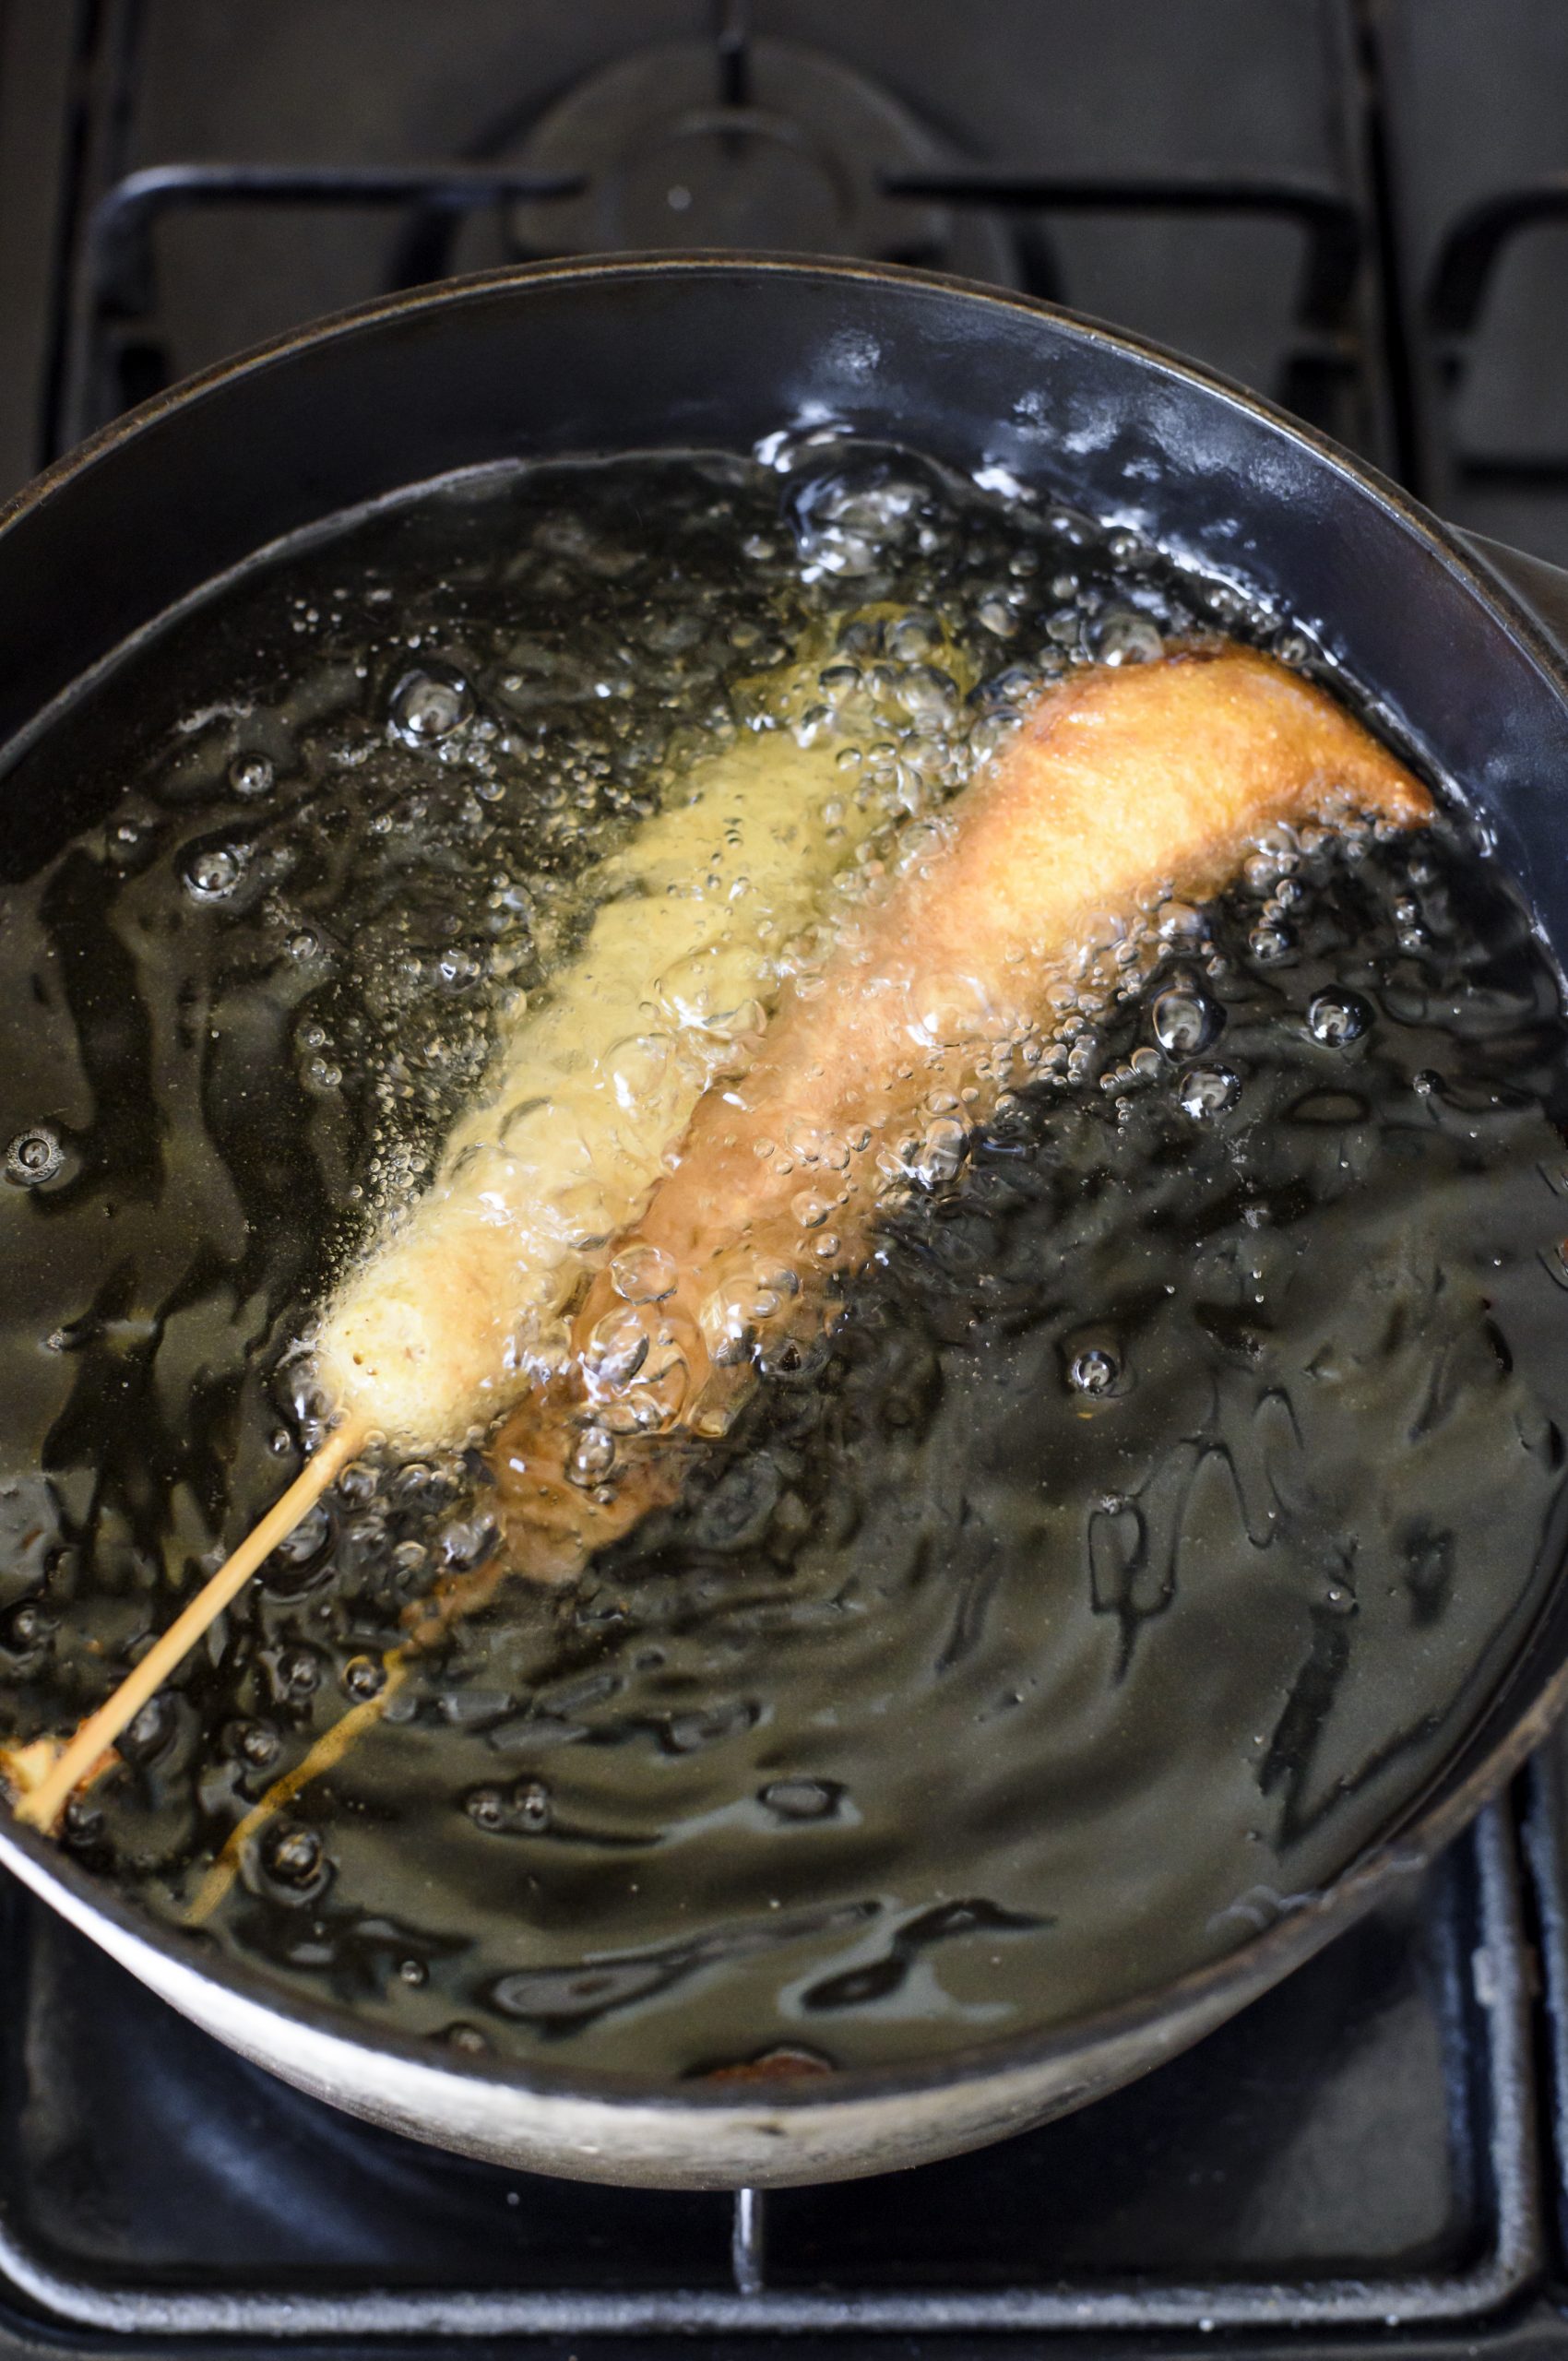 Place the battered corn dogs into the heated oil, and cook for 2-3 minutes until golden brown. 